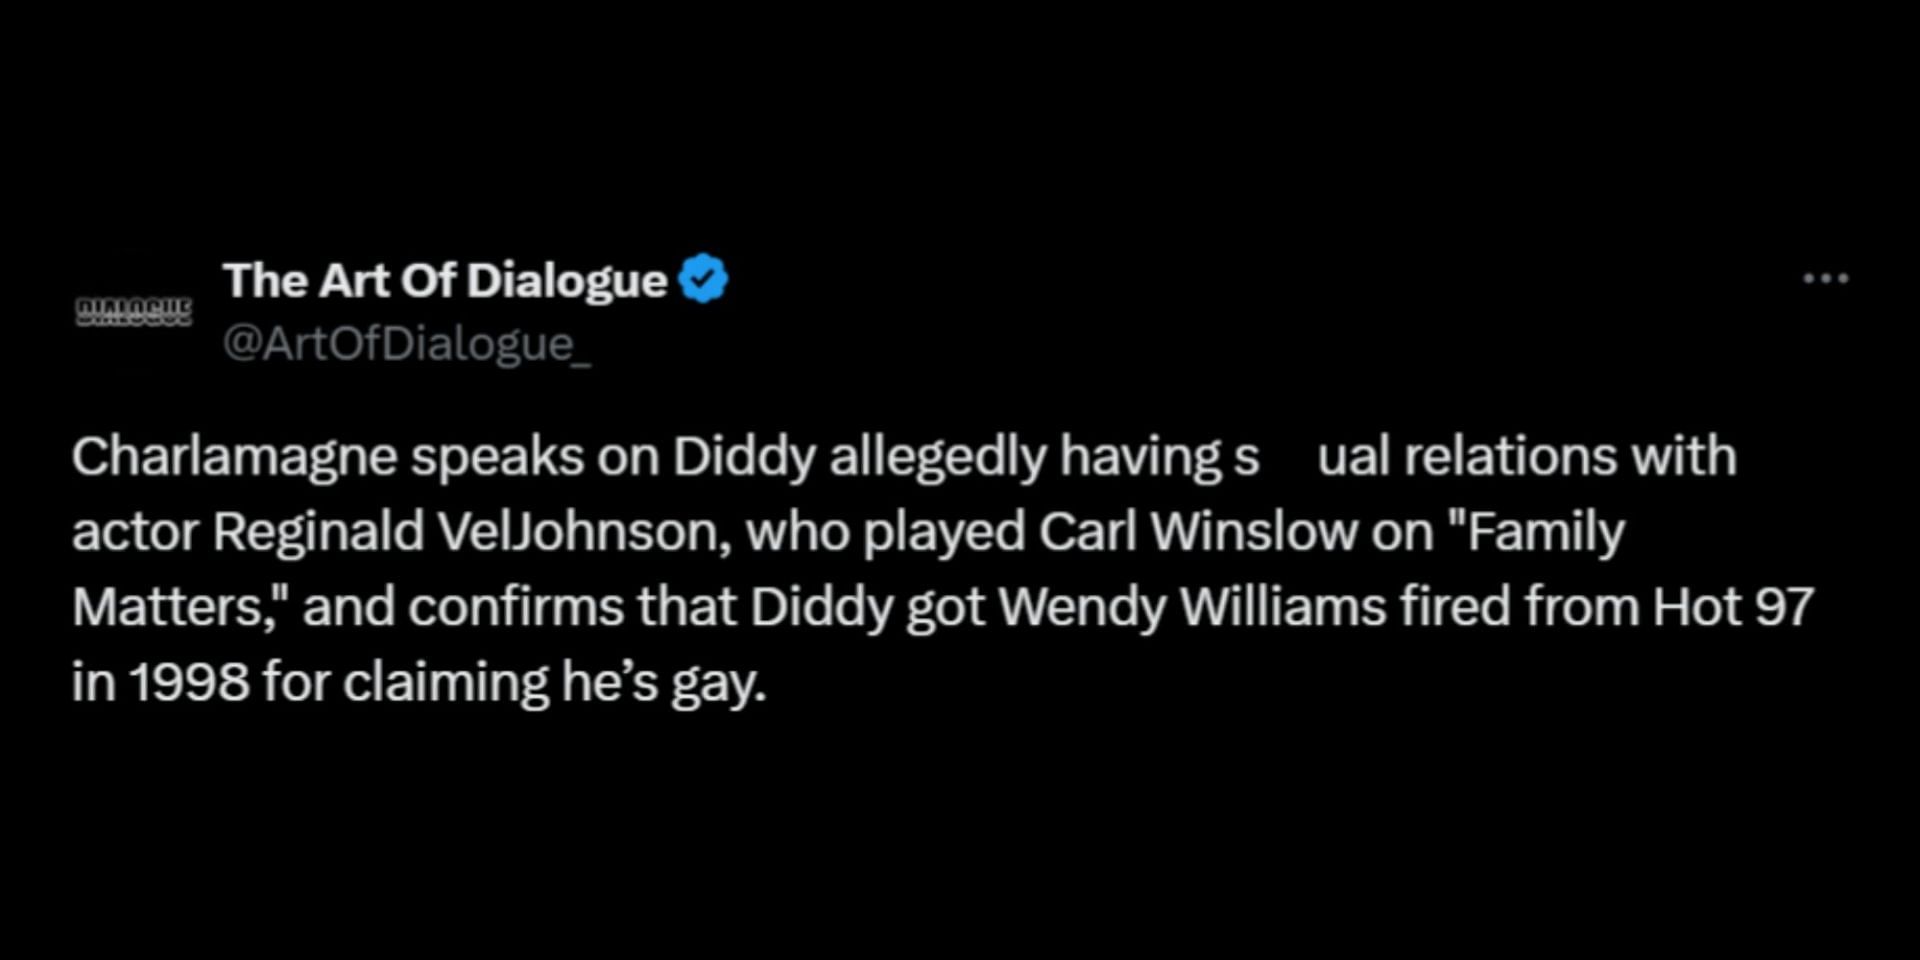 Charlamagne Tha God discussed claims about Diddy and the Family Matters actor. (Image via X/The Art of Dialogue)